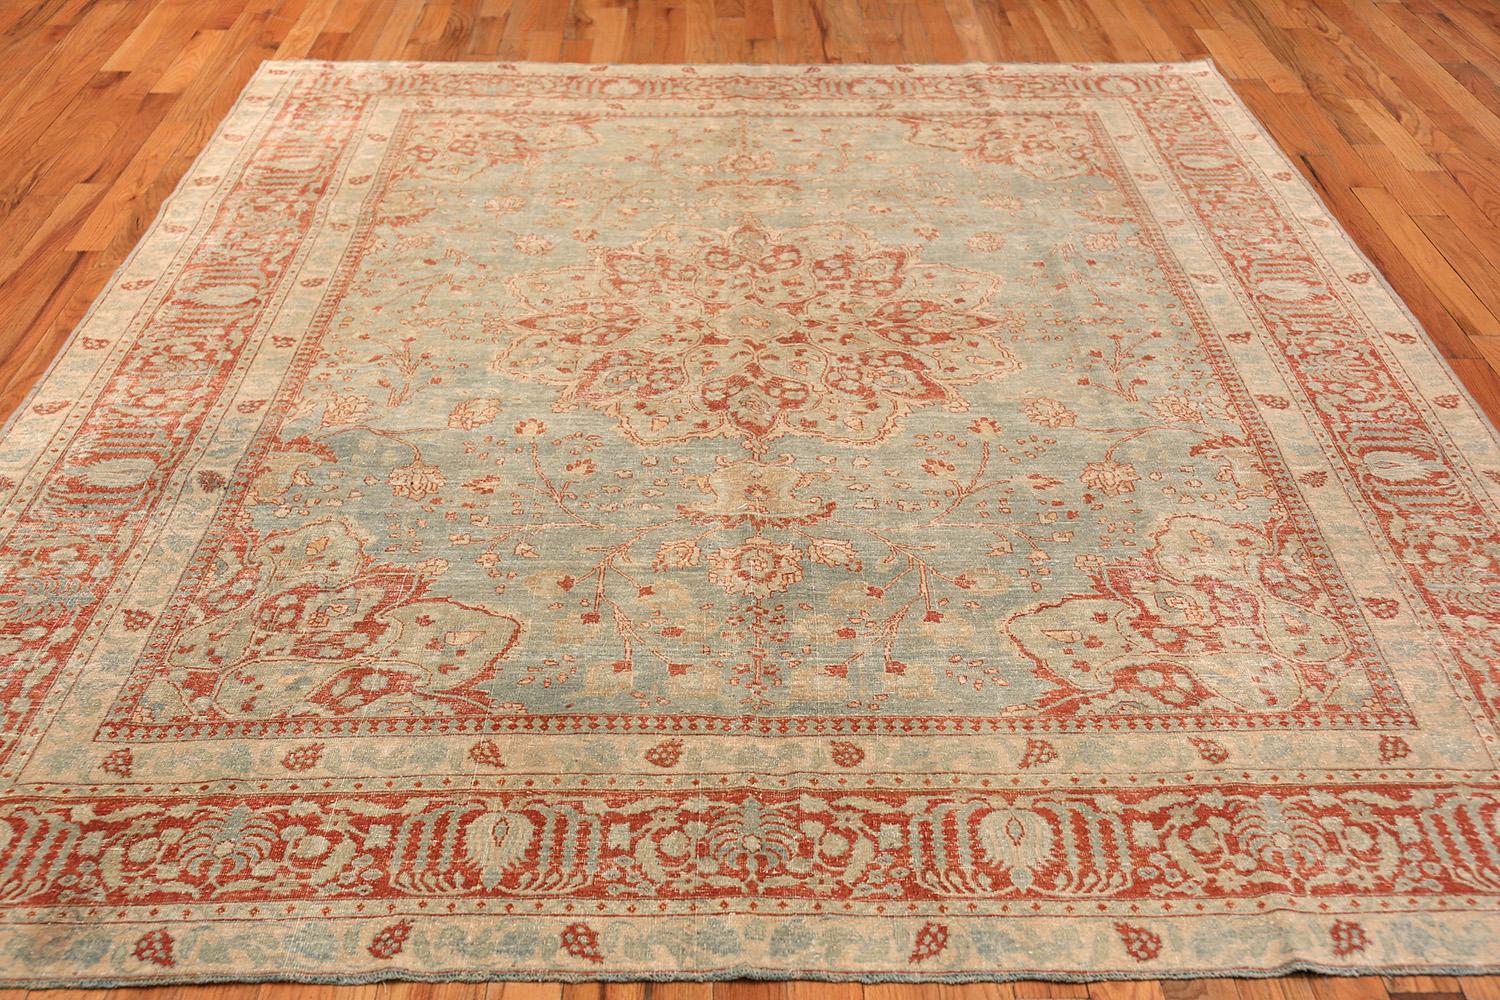 Light Blue Shabby Chic Antique Persian Tabriz Rug. Size: 8 ft 4 in x 10 ft 7 in 3